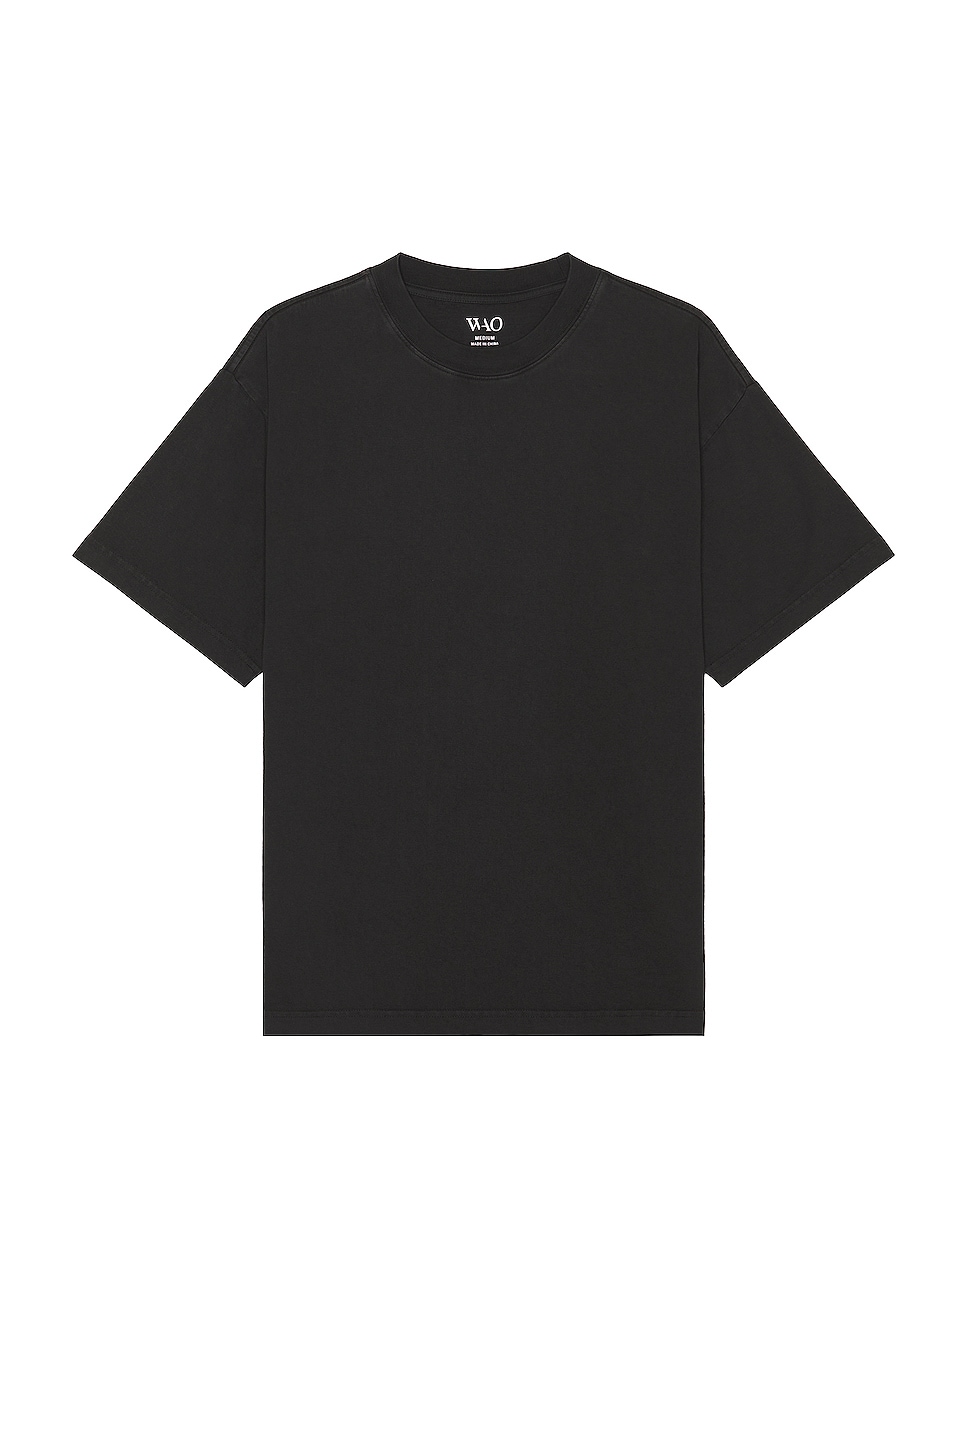 Image 1 of WAO The Relaxed Tee in Washed Black